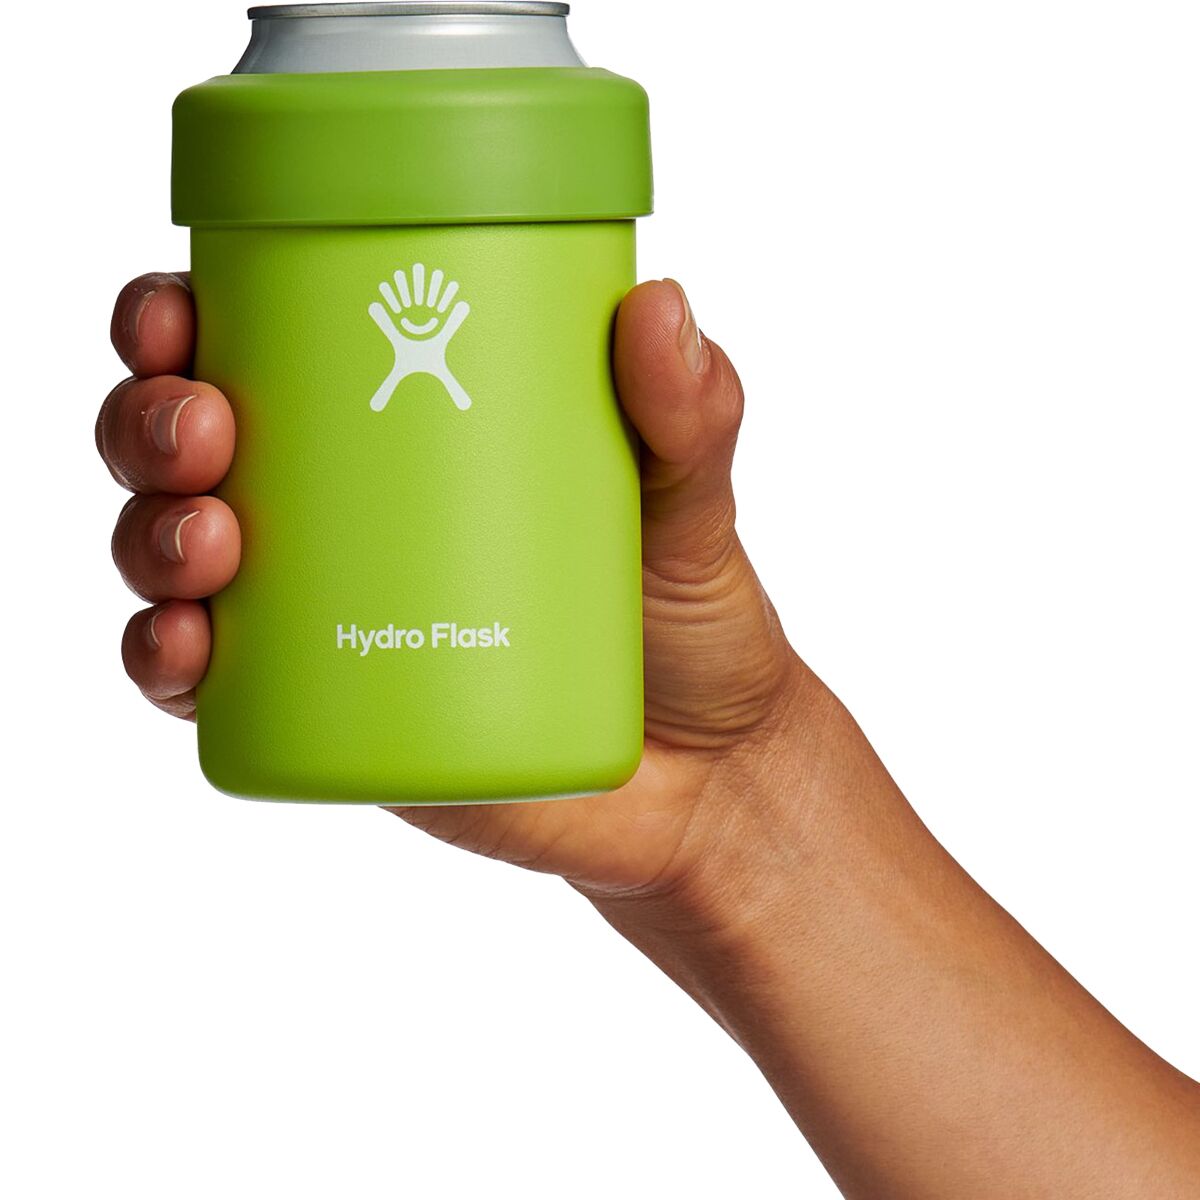  Hydro Flask Cooler Cup - Beer Seltzer Can Insulator